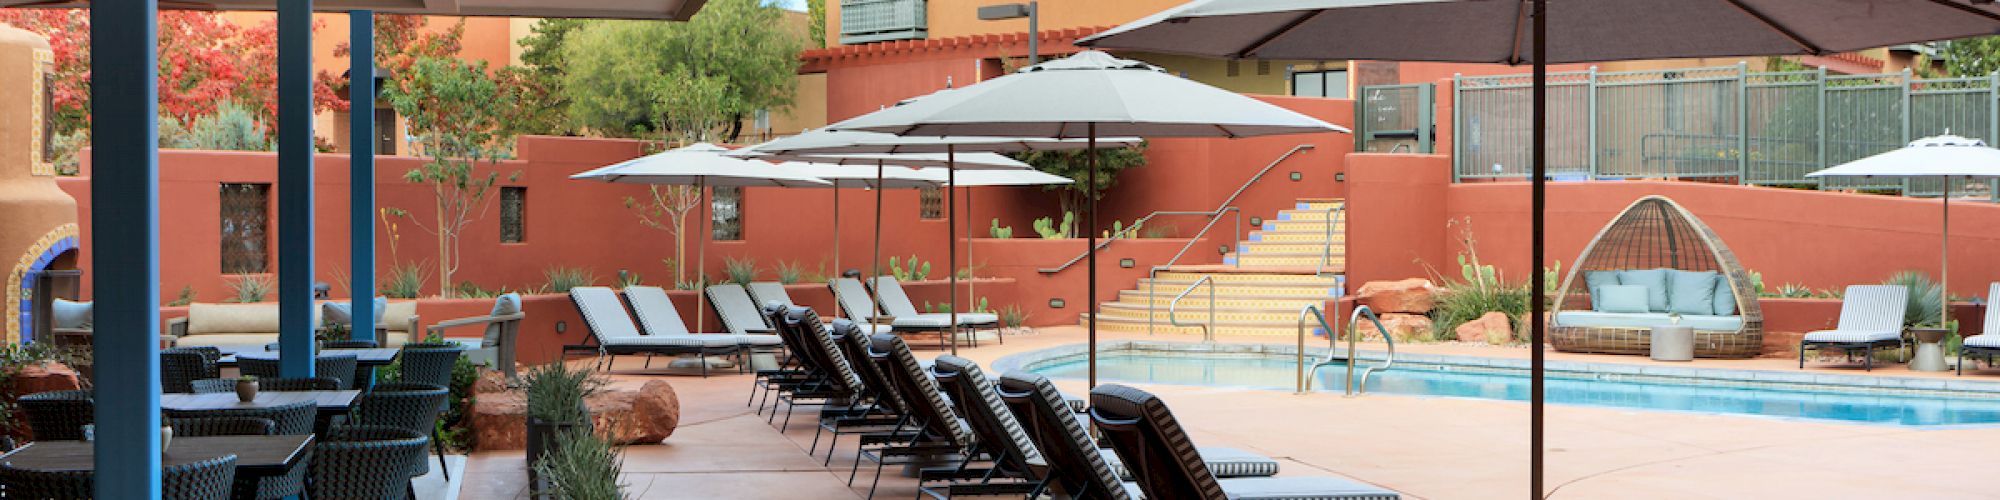 poolside lounge chairs with canopy